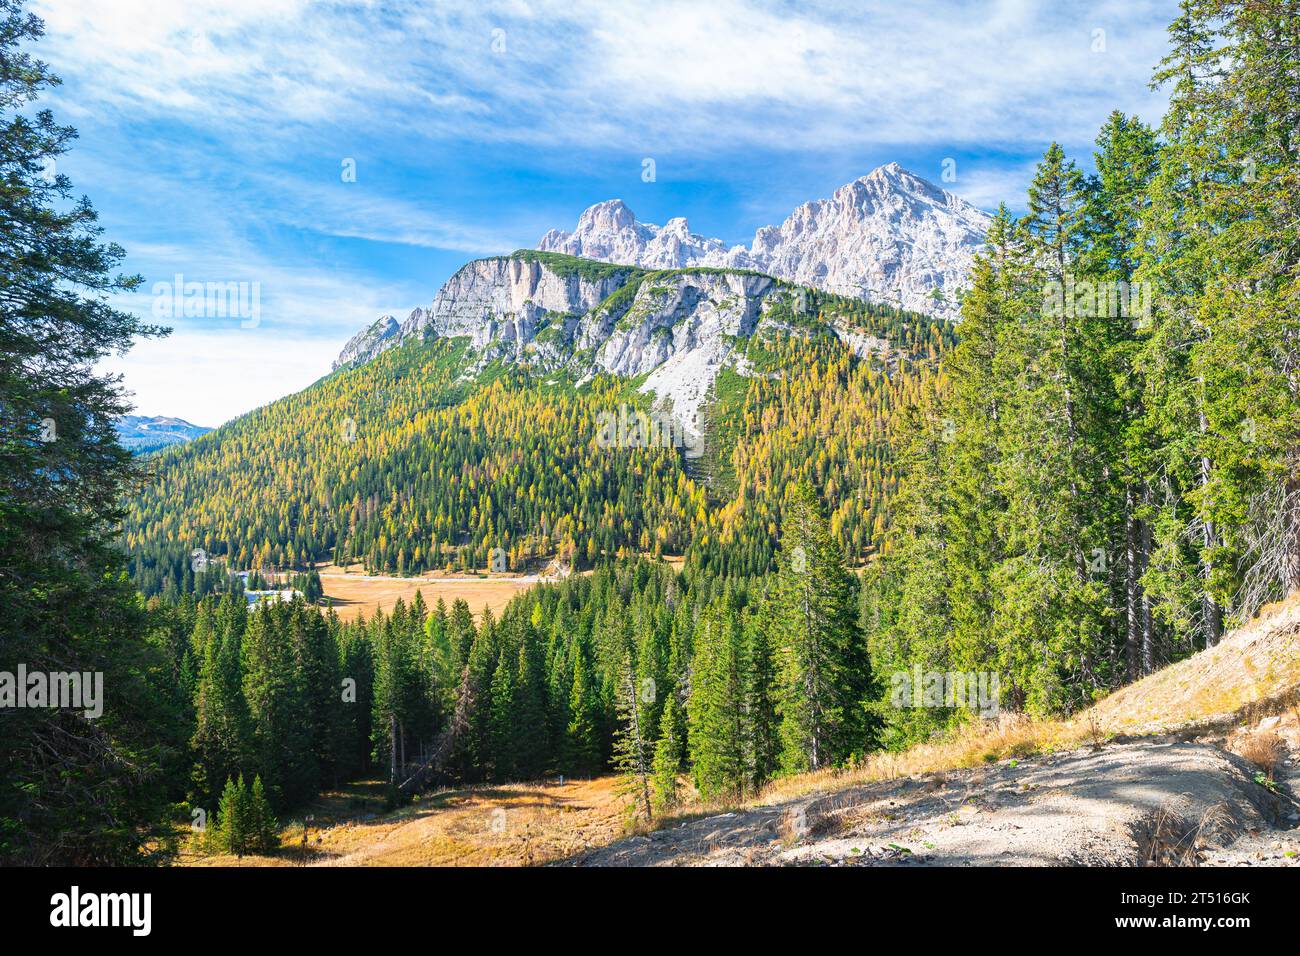 Colorful larch trees on the slope of a mountain Stock Photo